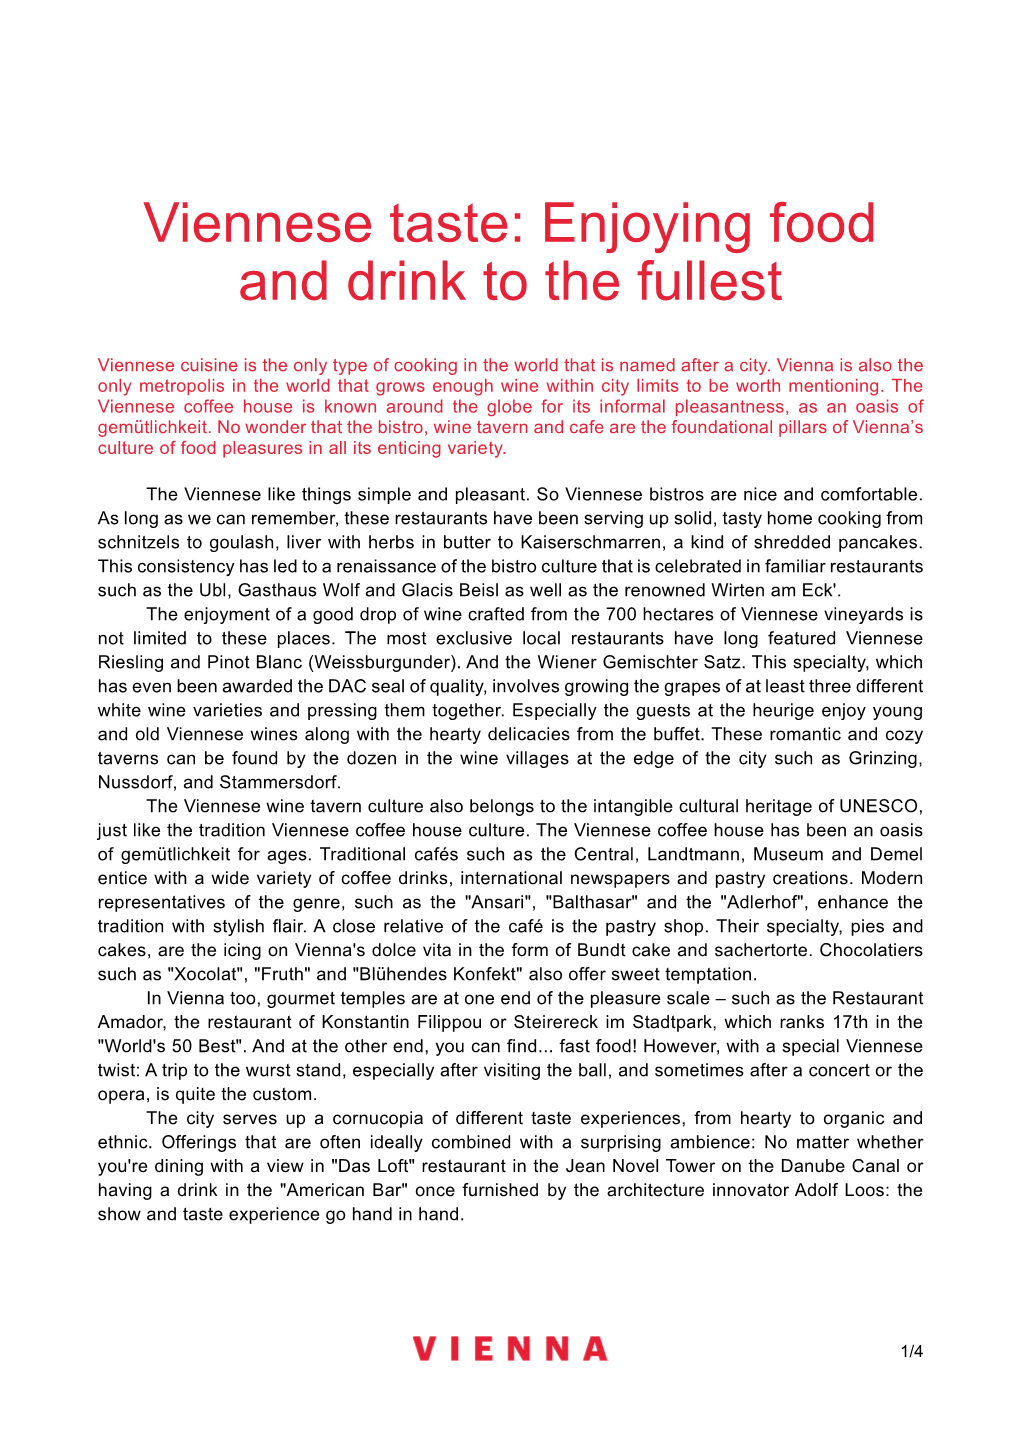 Viennese Taste: Enjoying Food and Drink to the Fullest